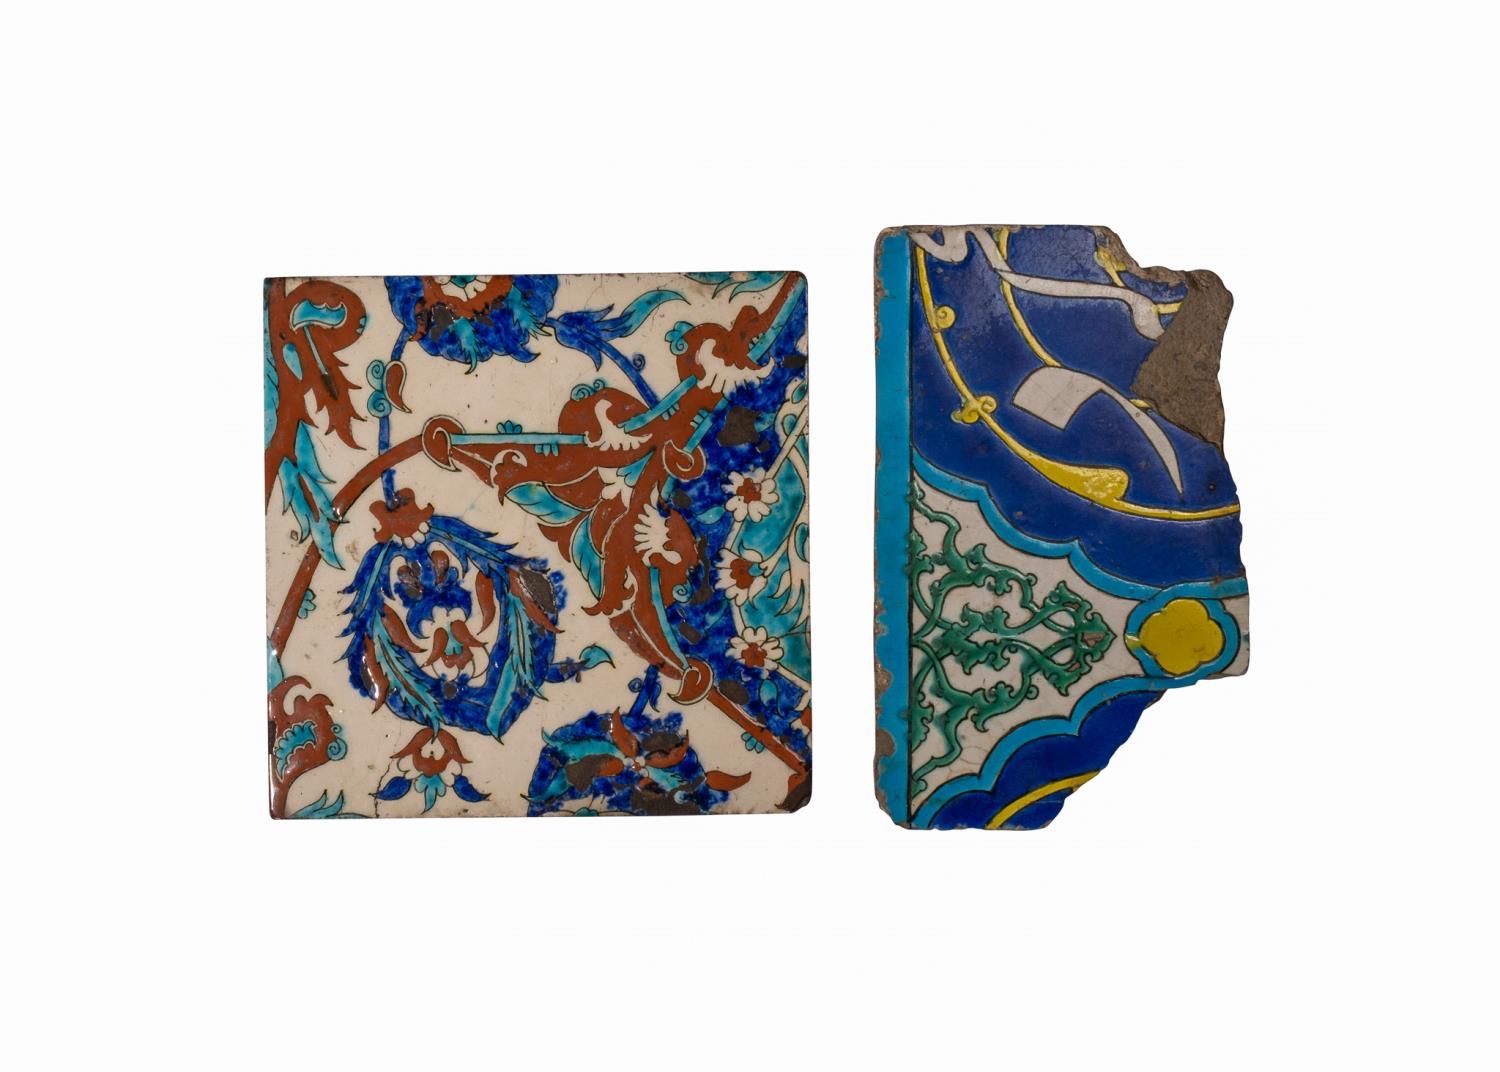 Null TWO OTTOMAN IONIC IZNIK TILES, 16TH CENTURY AND LATER
 
 Zwei Ionische Kach&hellip;